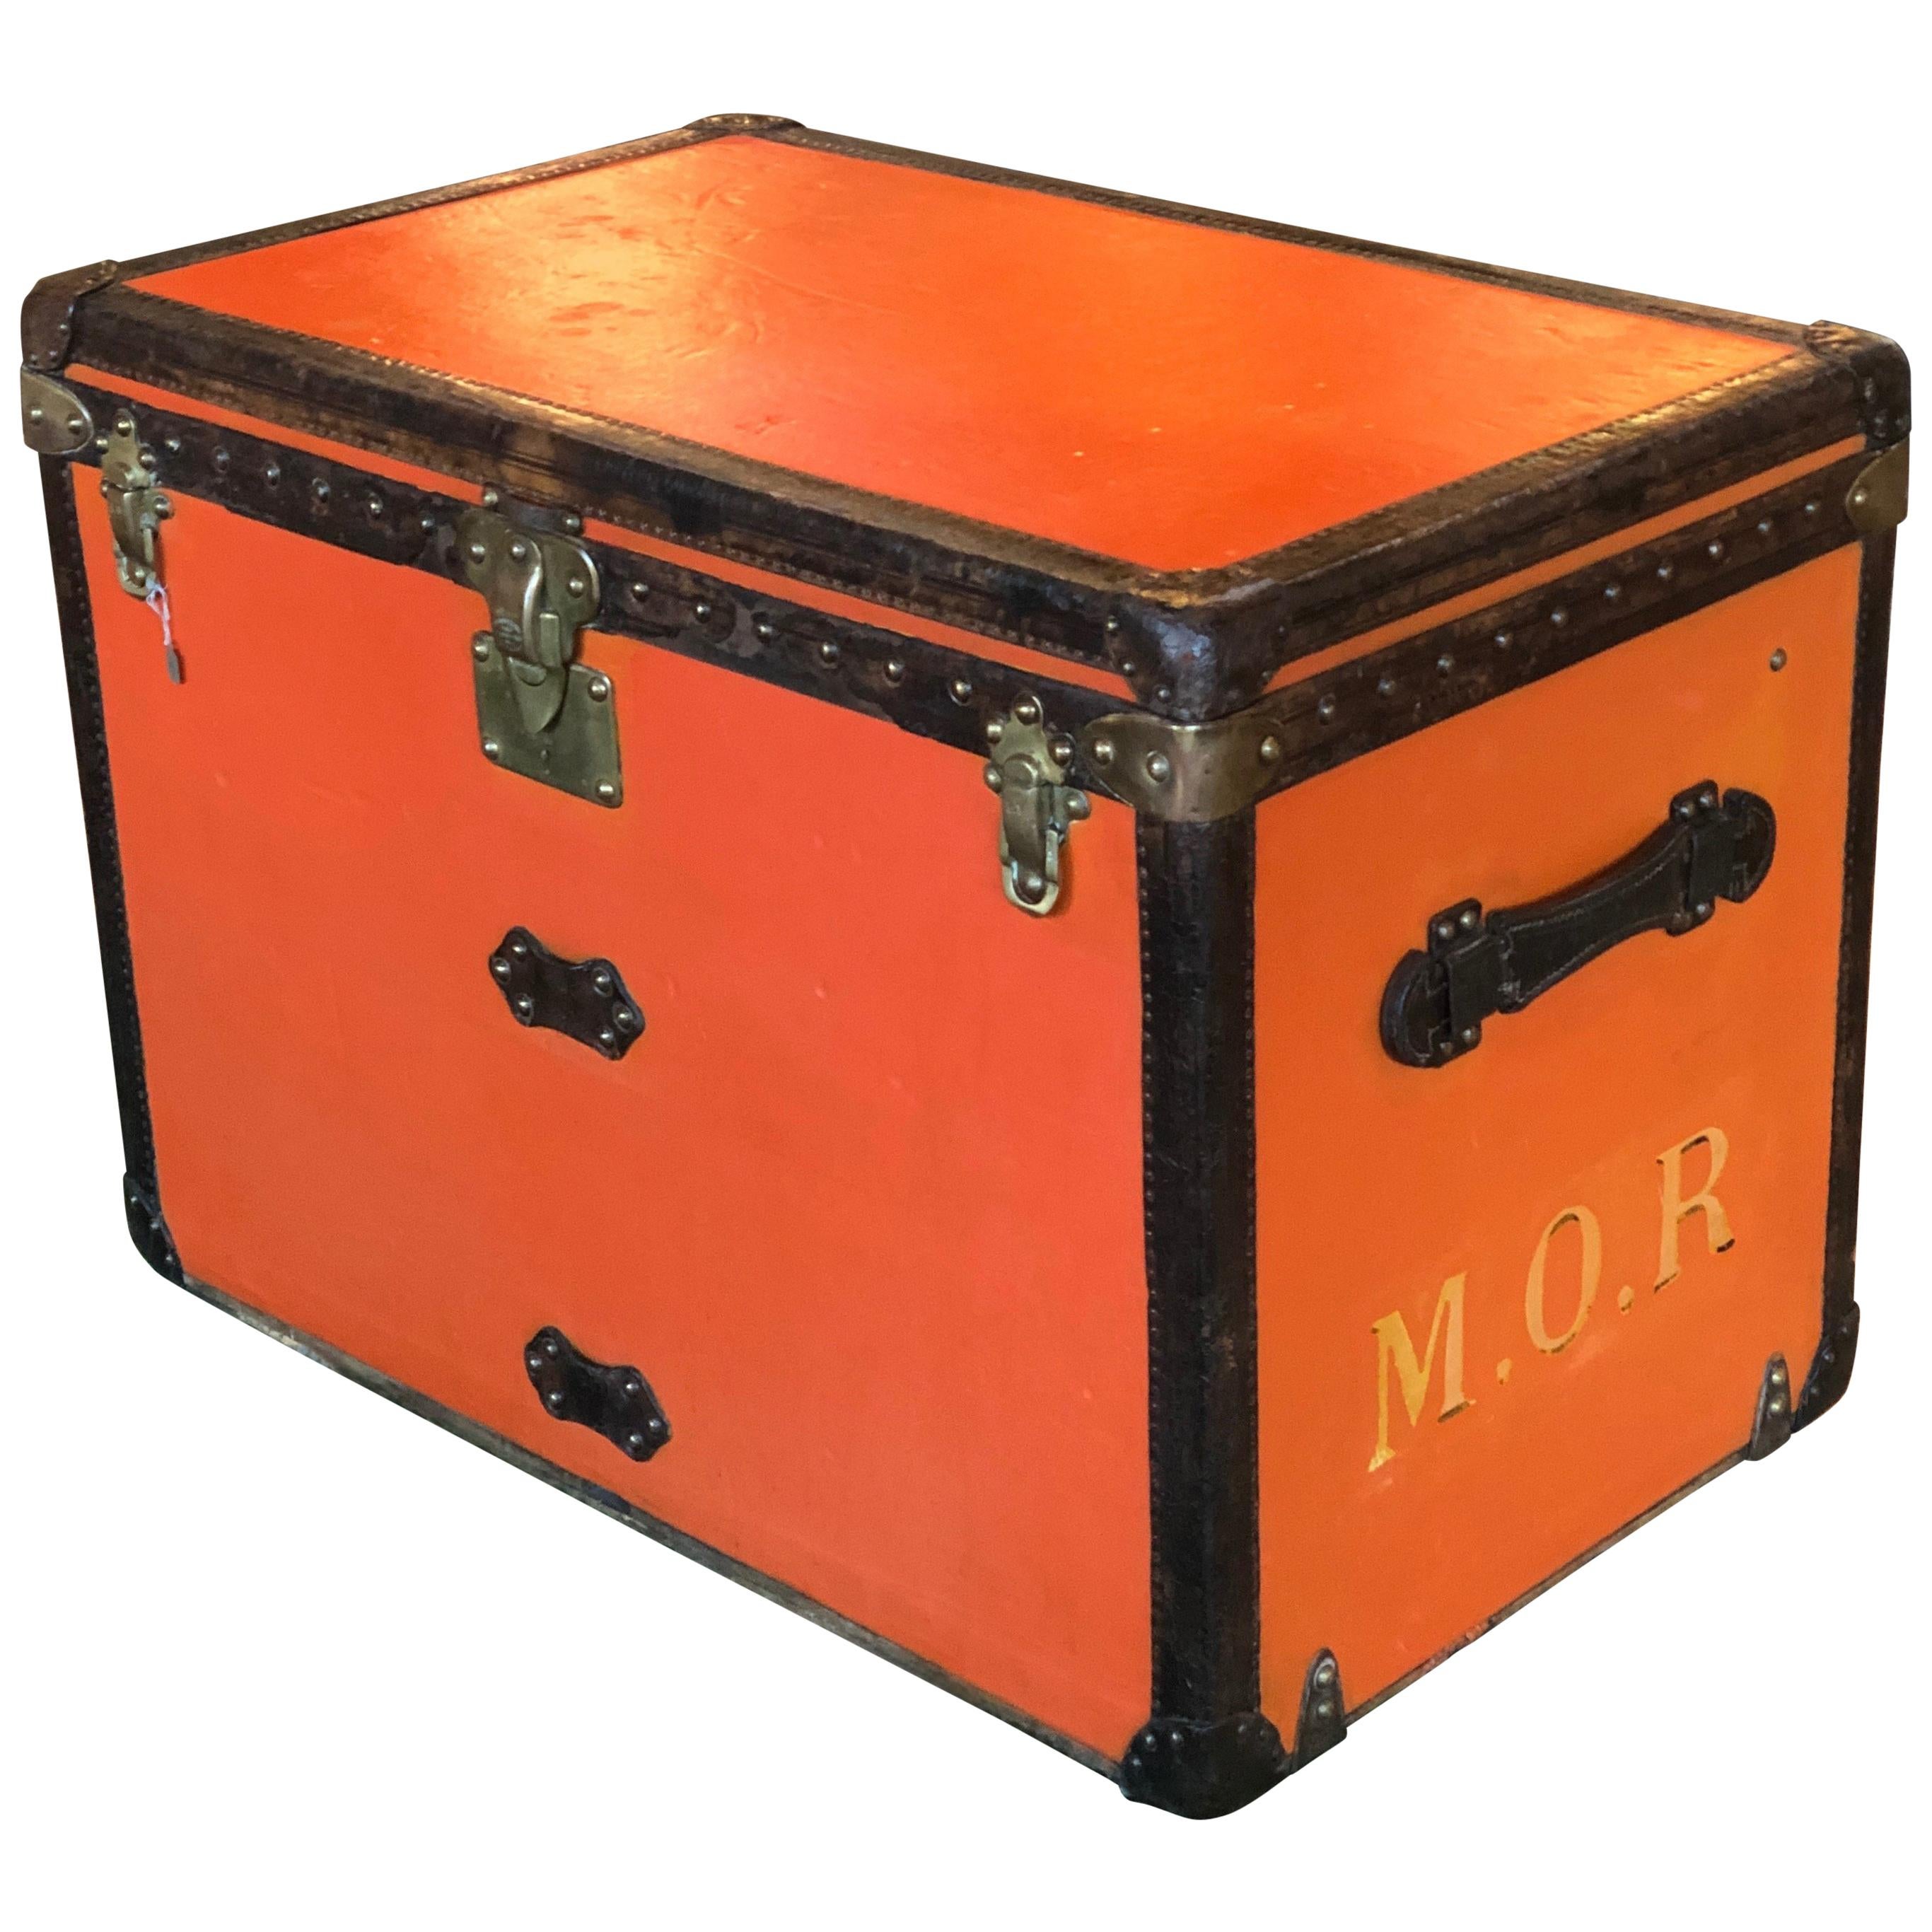 LOUIS VUITTON Rare / antique Manufactured from 1888 to 1900 Marquerie  trunk